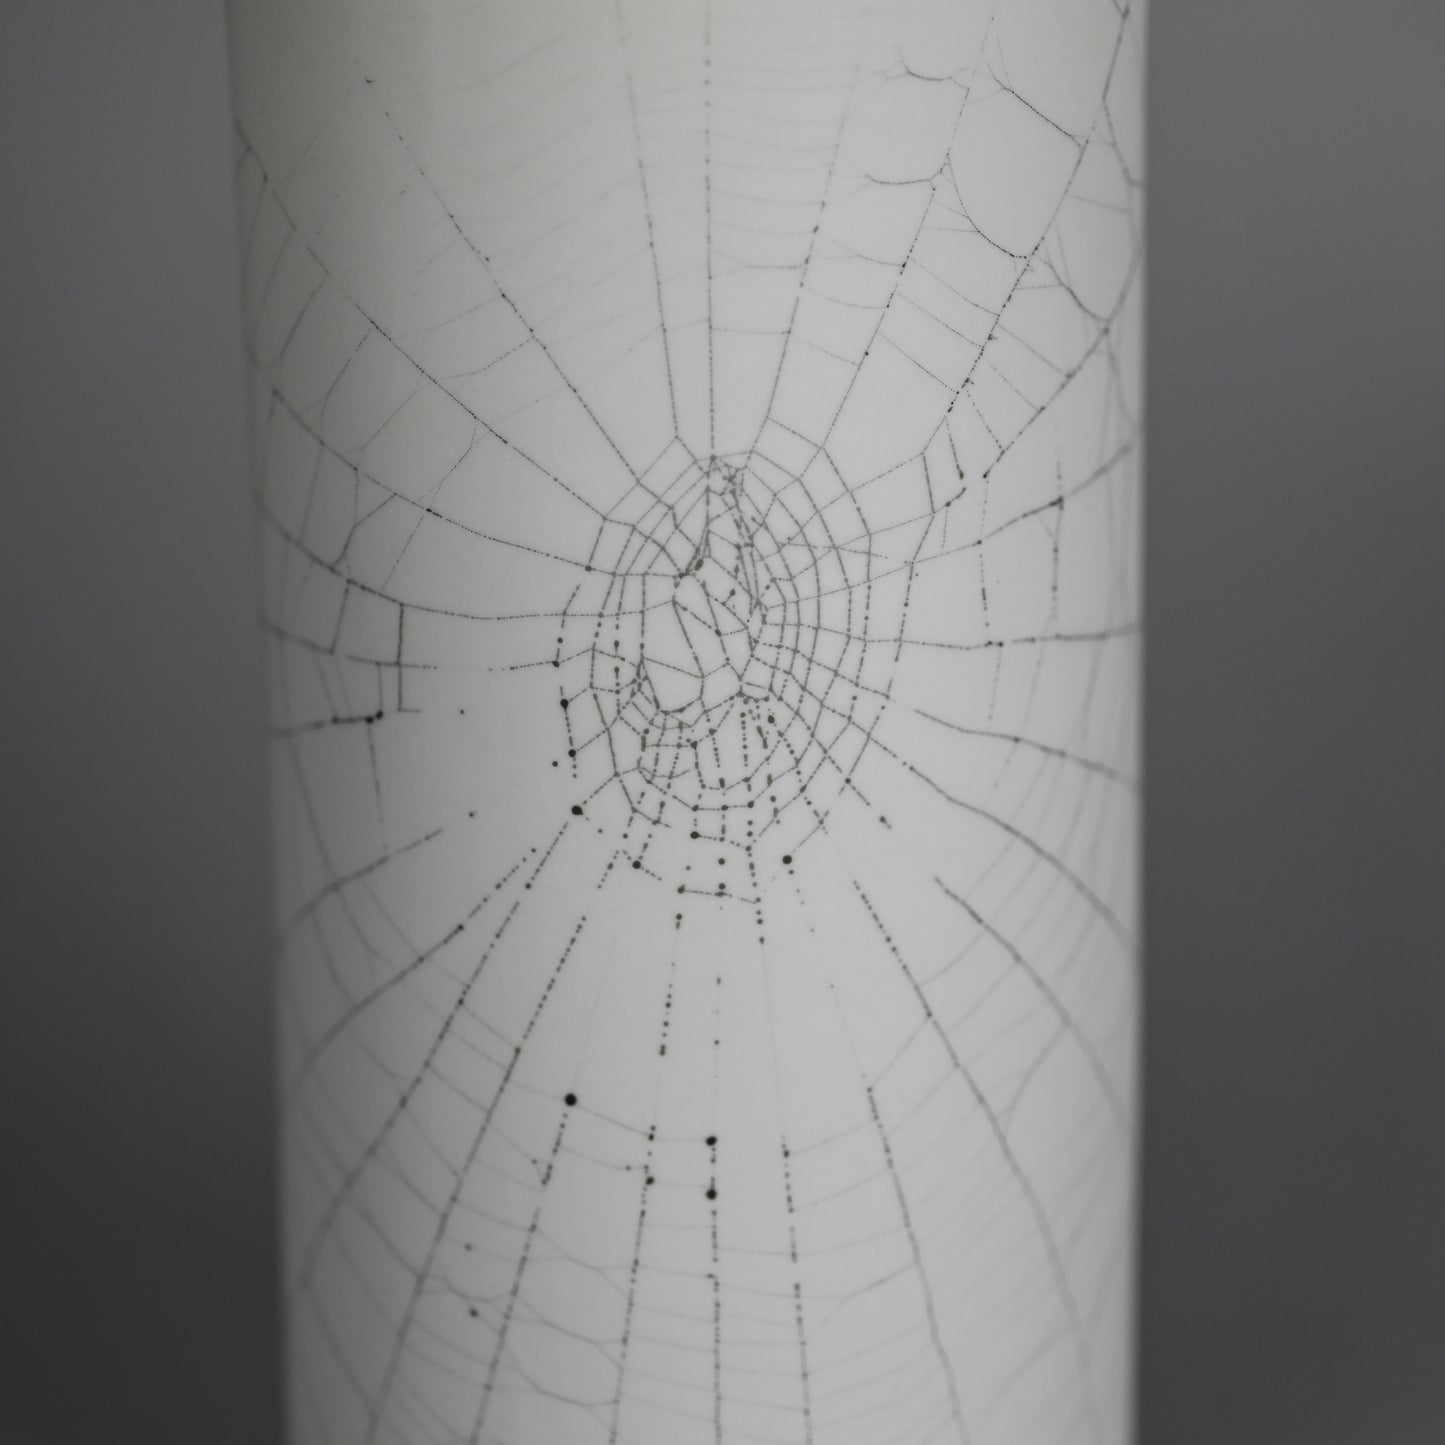 Web on Clay (189), Collected September 25, 2022